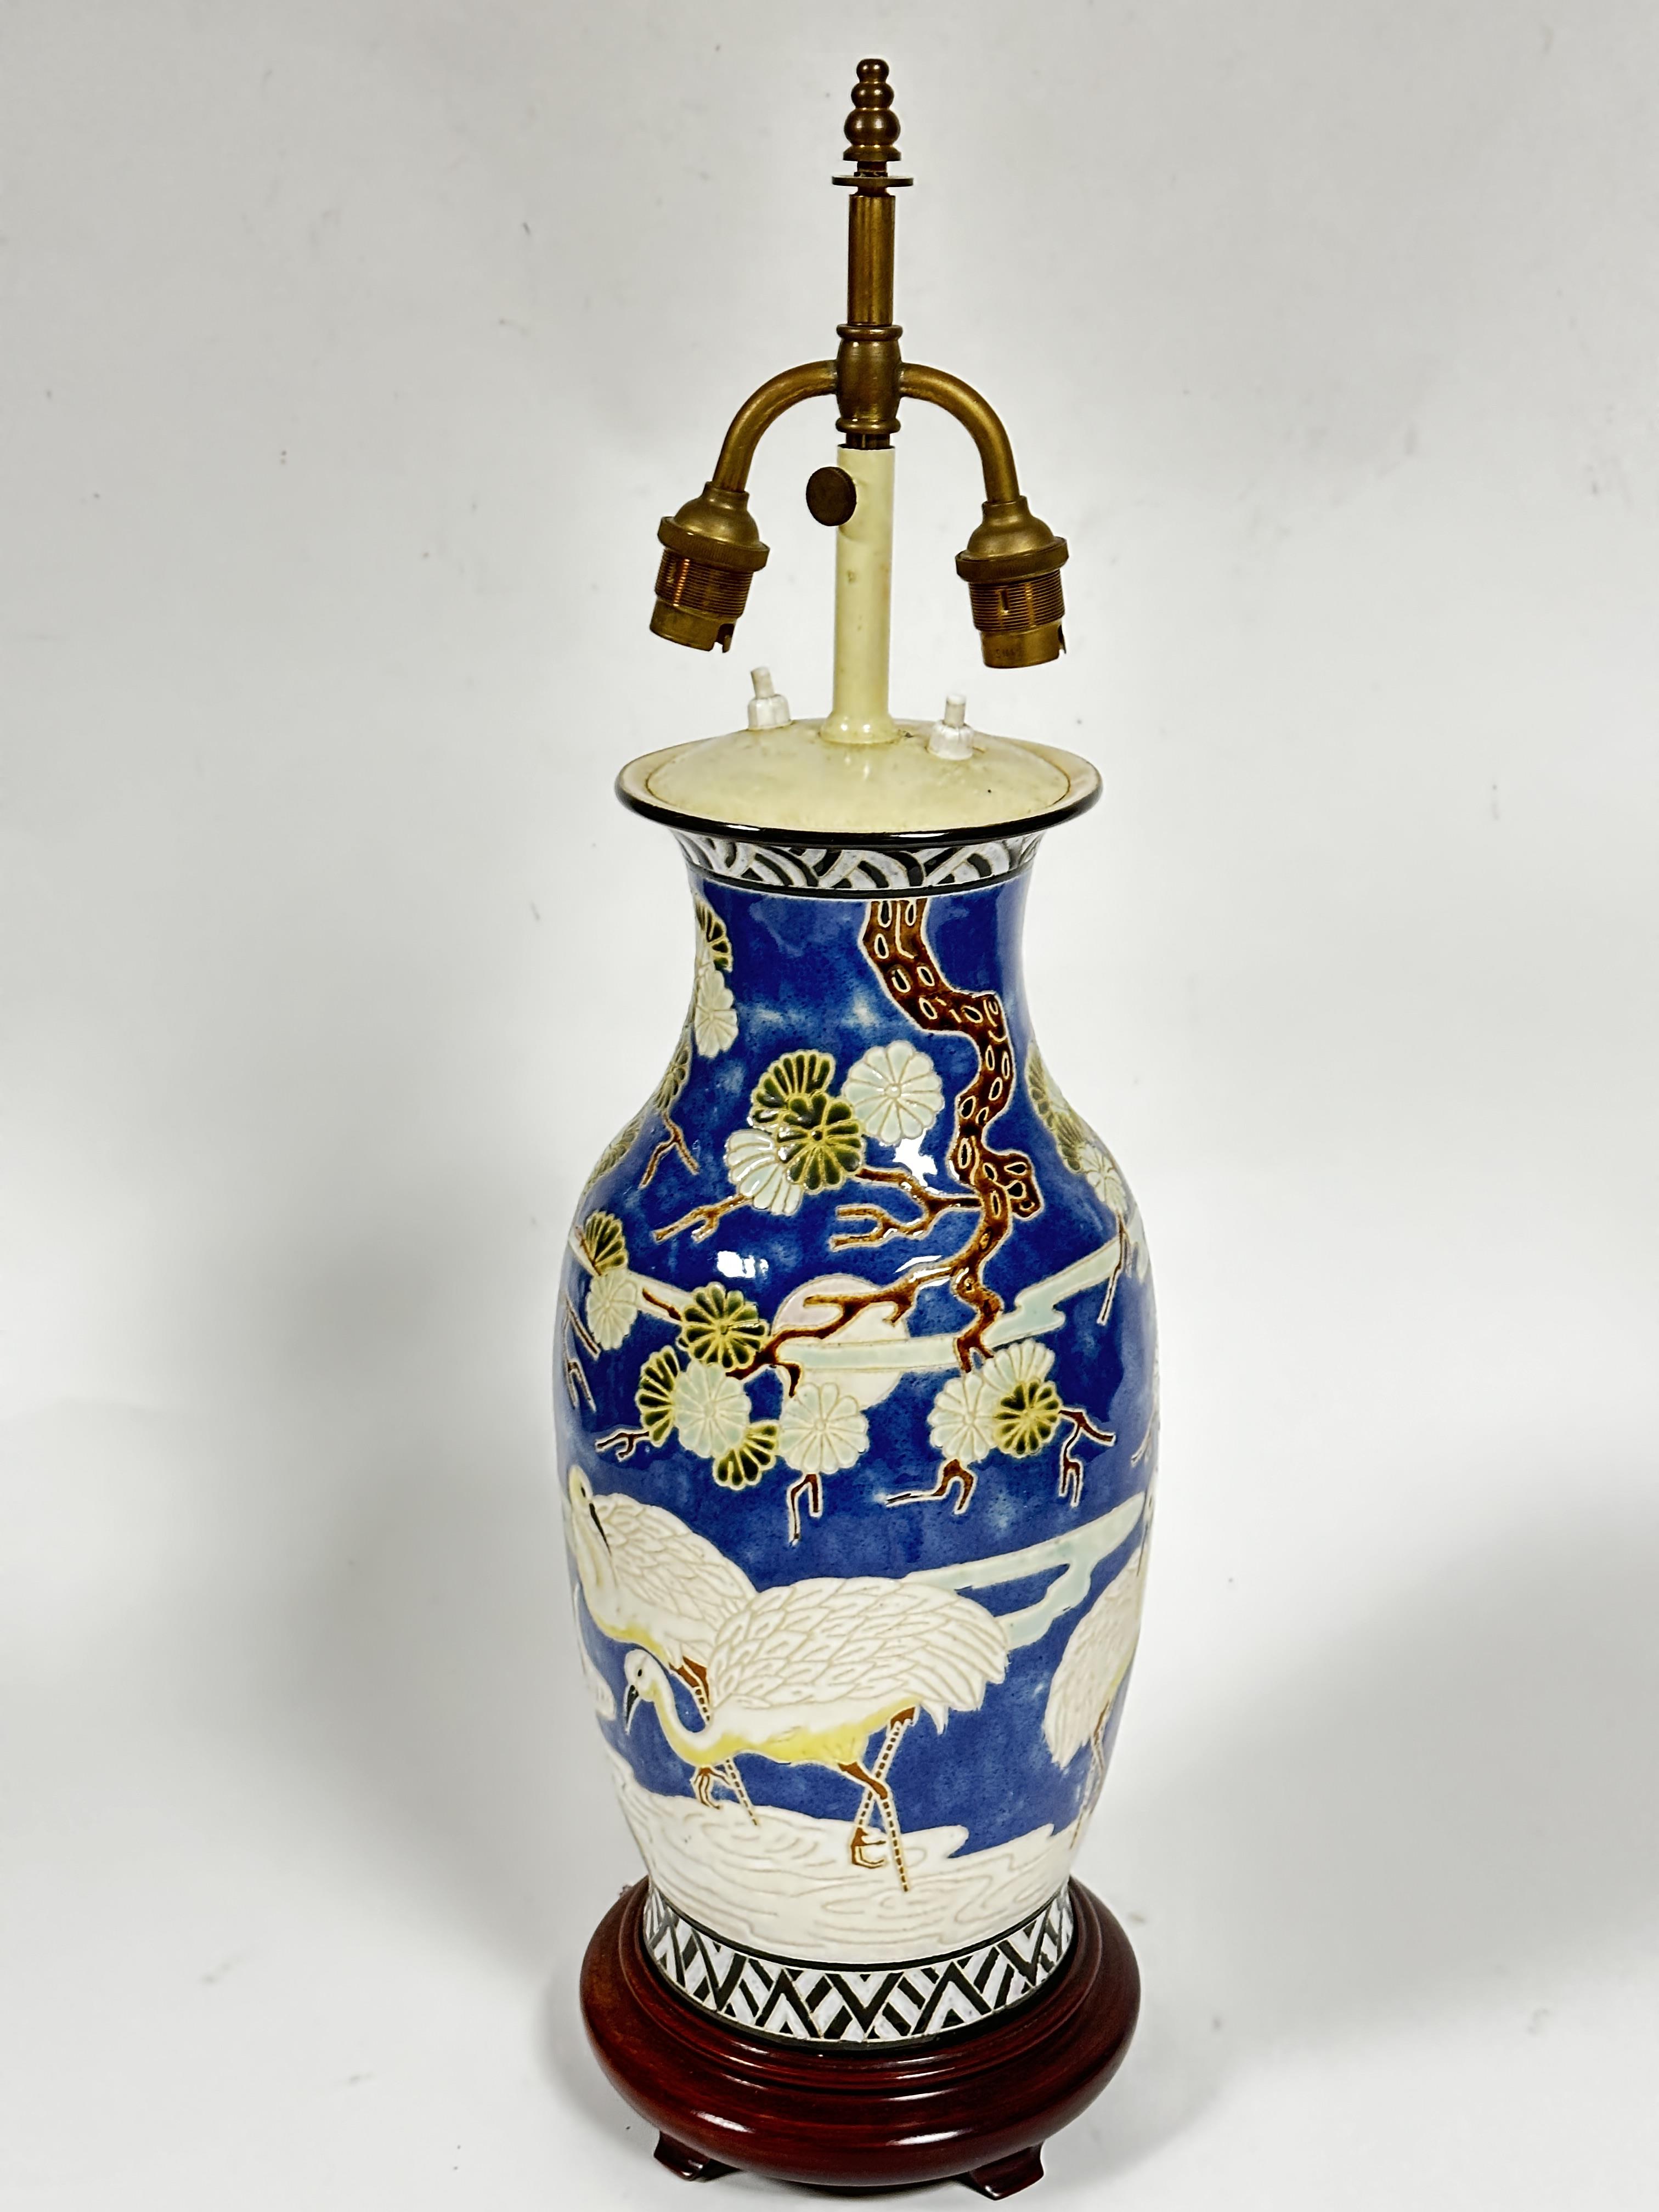 A Japanese baluster vase converted to lamp depicting scenes with cranes and prunis trees, blue